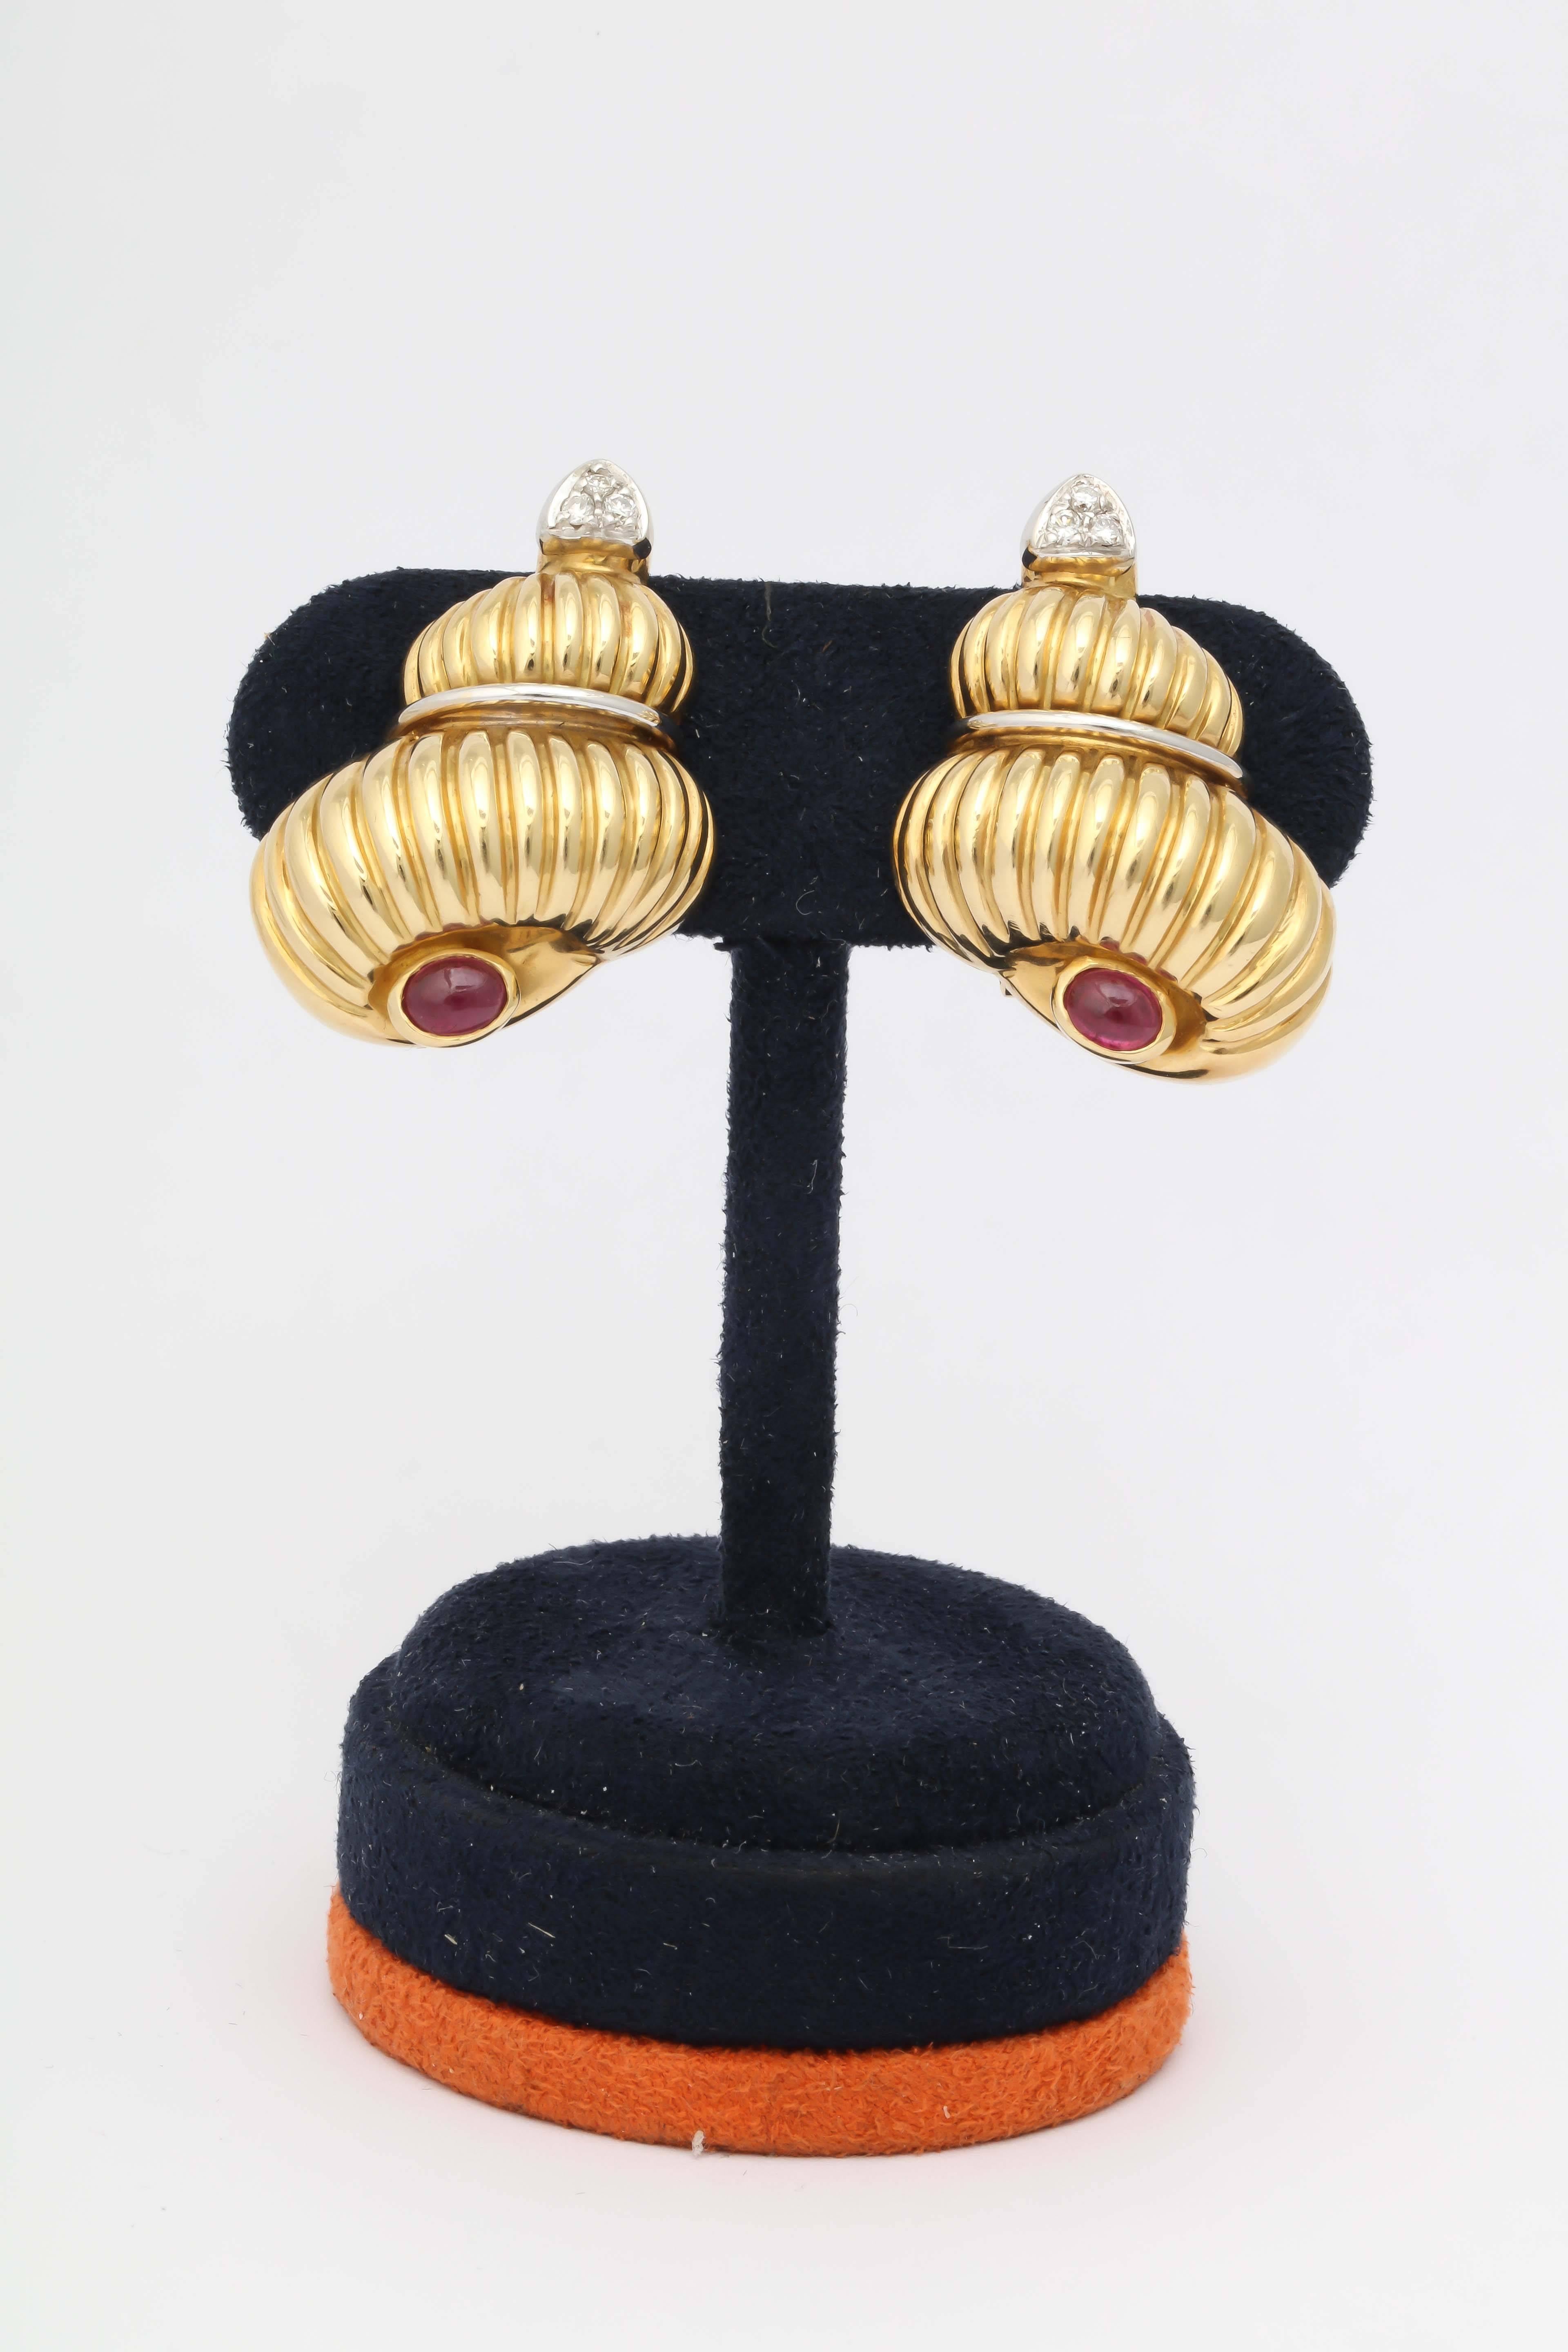 18kt Yellow Gold Figural Design Shell Earclips With Posts. Each Earring Designed With1 Cabochon Ruby And 3 Full Cut High Quality Diamond Embellishments. Made In ITALY in The 1980's.